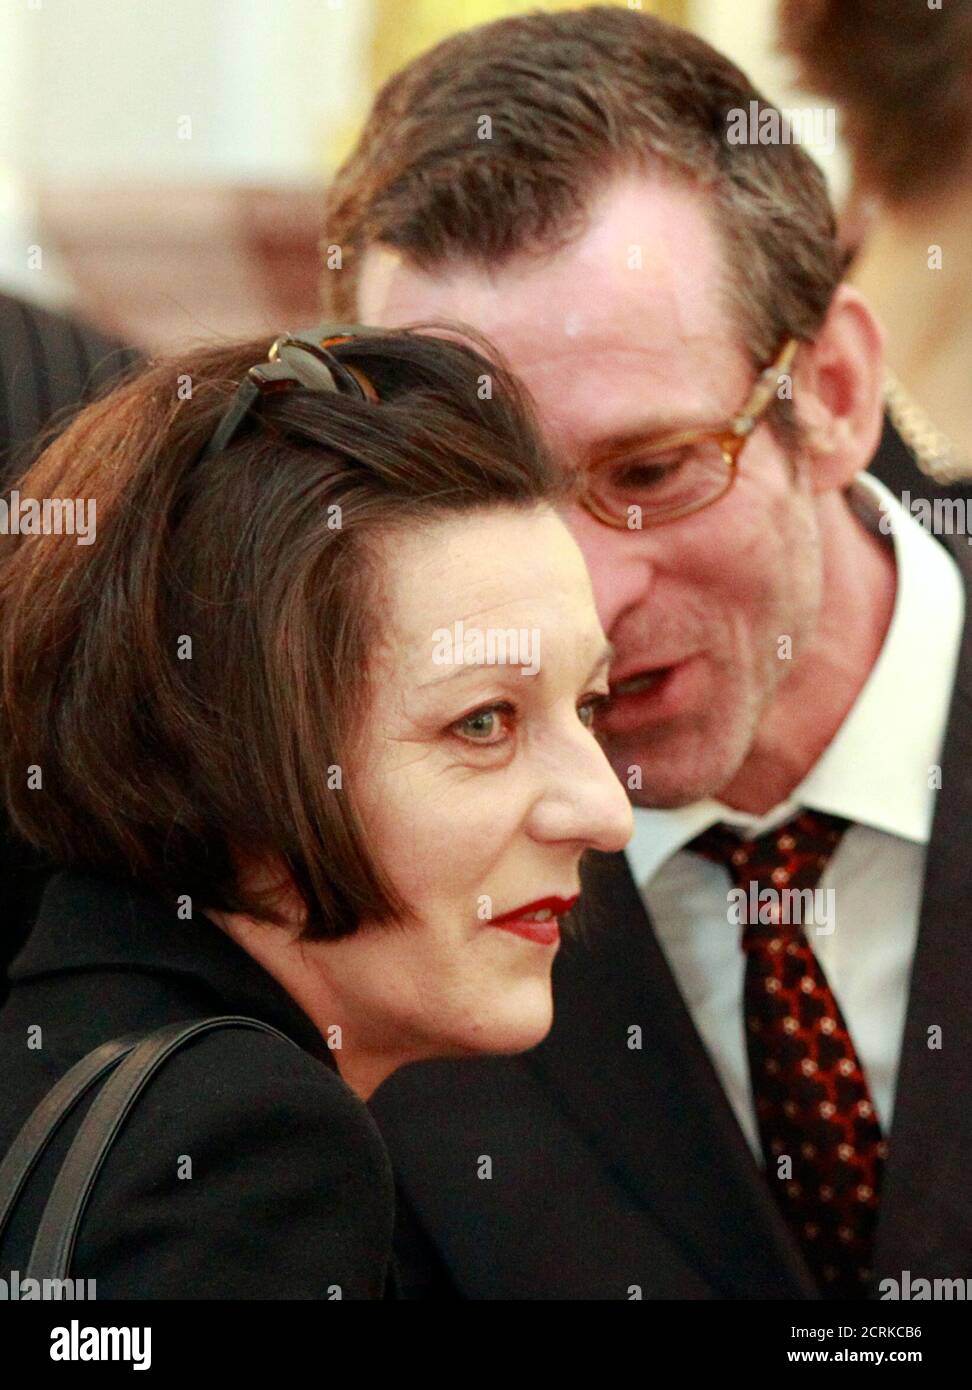 German actor Ulrich Matthes (R) talks with writer and Nobel Prize laureate Herta Mueller after she received the Great Cross of Merit with Star at Bellevue Castle in Berlin May 6, 2010.   REUTERS/Thomas Peter  (GERMANY - Tags: ENTERTAINMENT POLITICS) Stock Photo